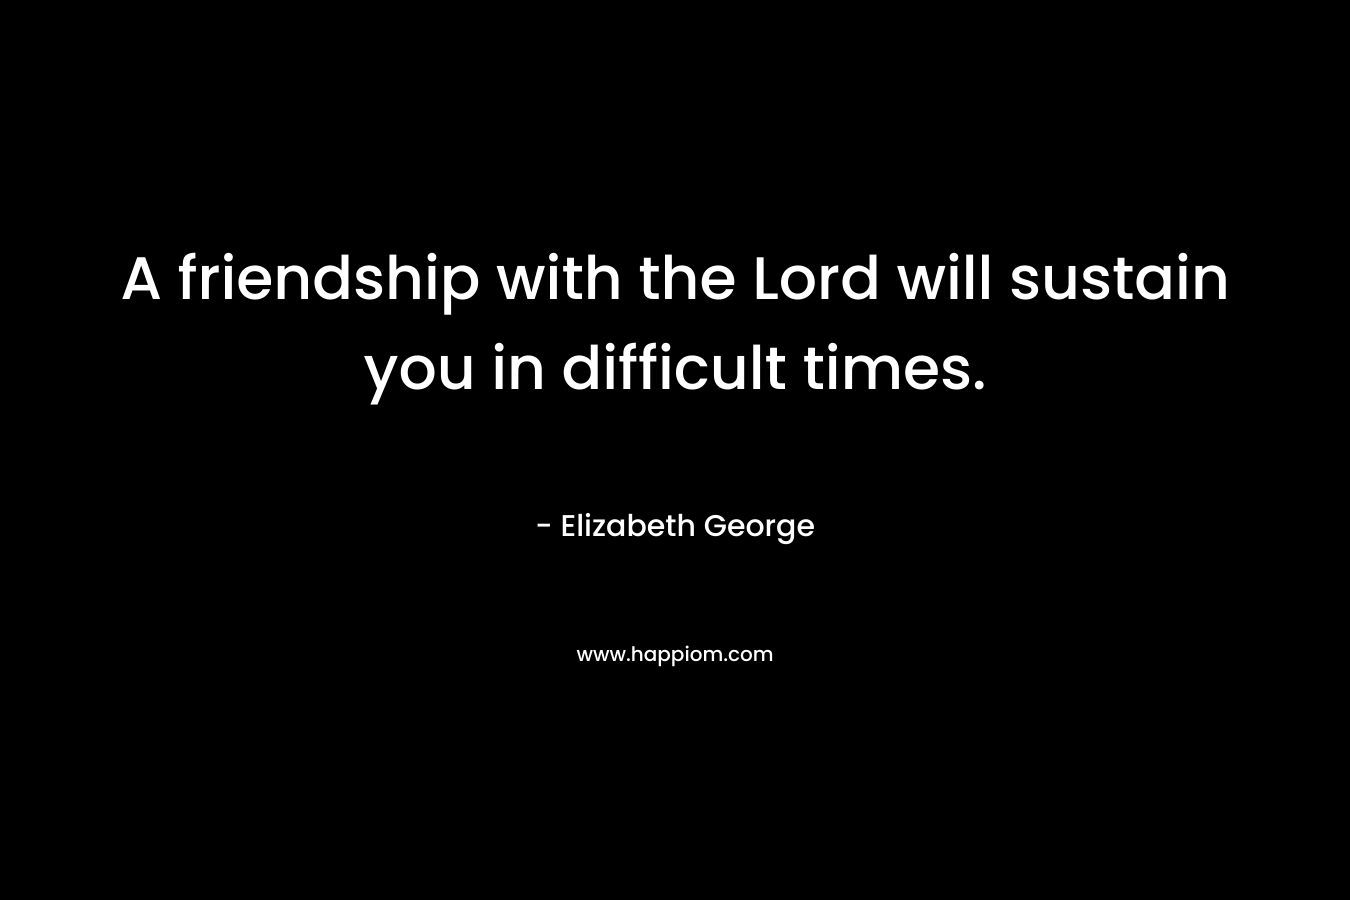 A friendship with the Lord will sustain you in difficult times. – Elizabeth George